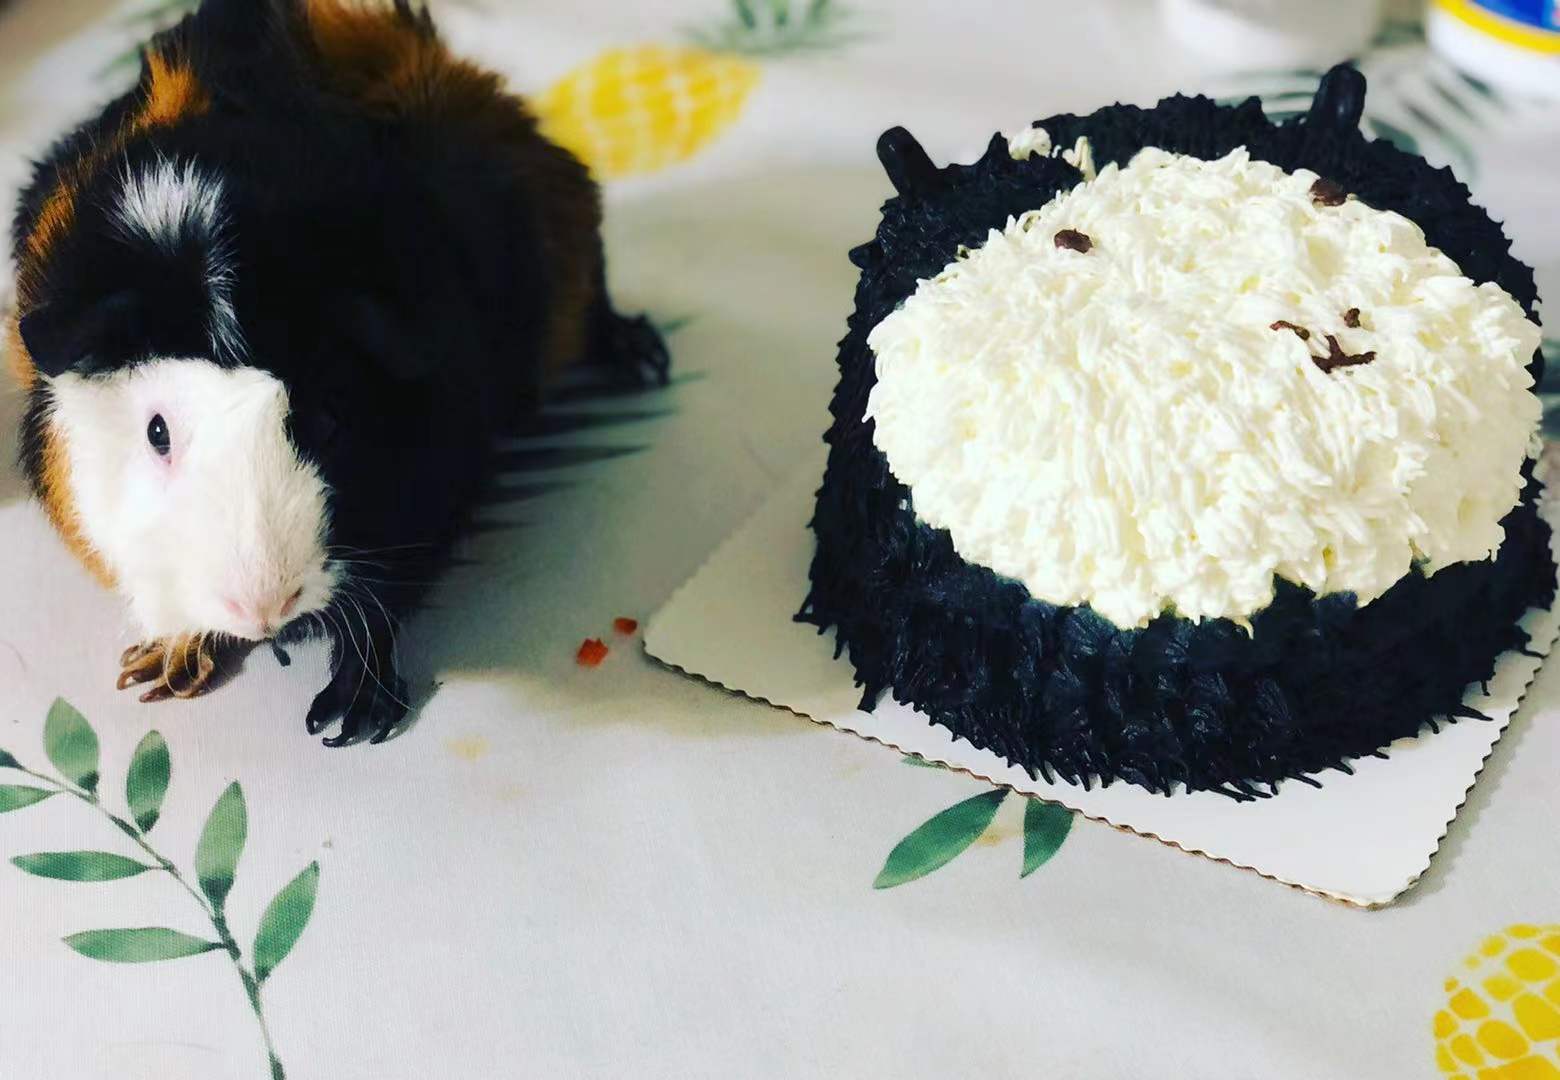 On a floral tablecloth, there is a small black and white guinea pig beside a guinea pig cake with dark black frosting and a white frosting face. Photo by Xiaohui Zhang.